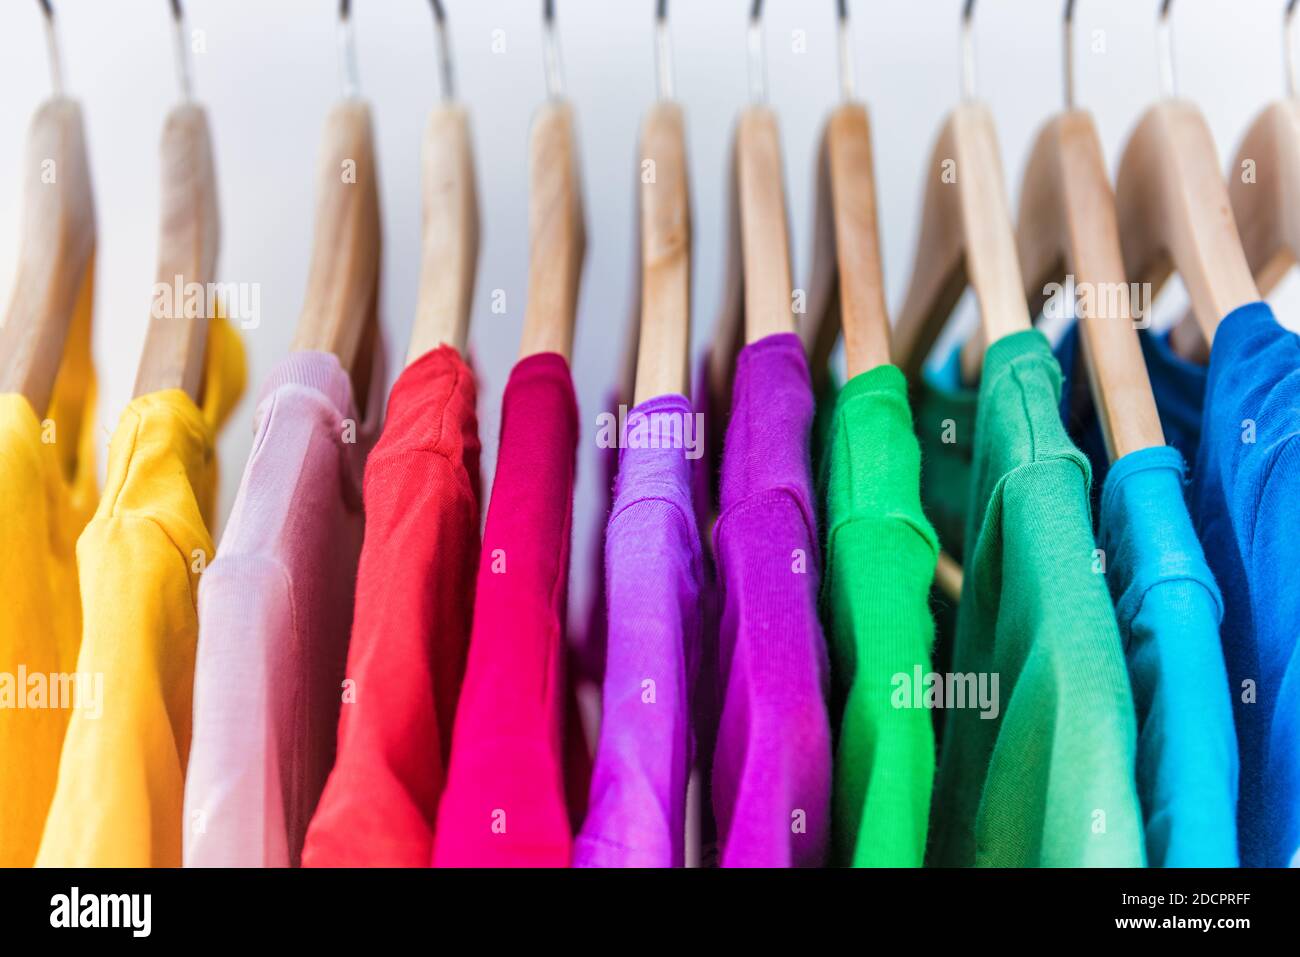 https://c8.alamy.com/comp/2DCPRFF/fashion-clothes-on-clothing-rack-bright-colorful-closet-closeup-of-rainbow-color-choice-of-trendy-female-wear-on-hangers-in-store-closet-or-spring-2DCPRFF.jpg